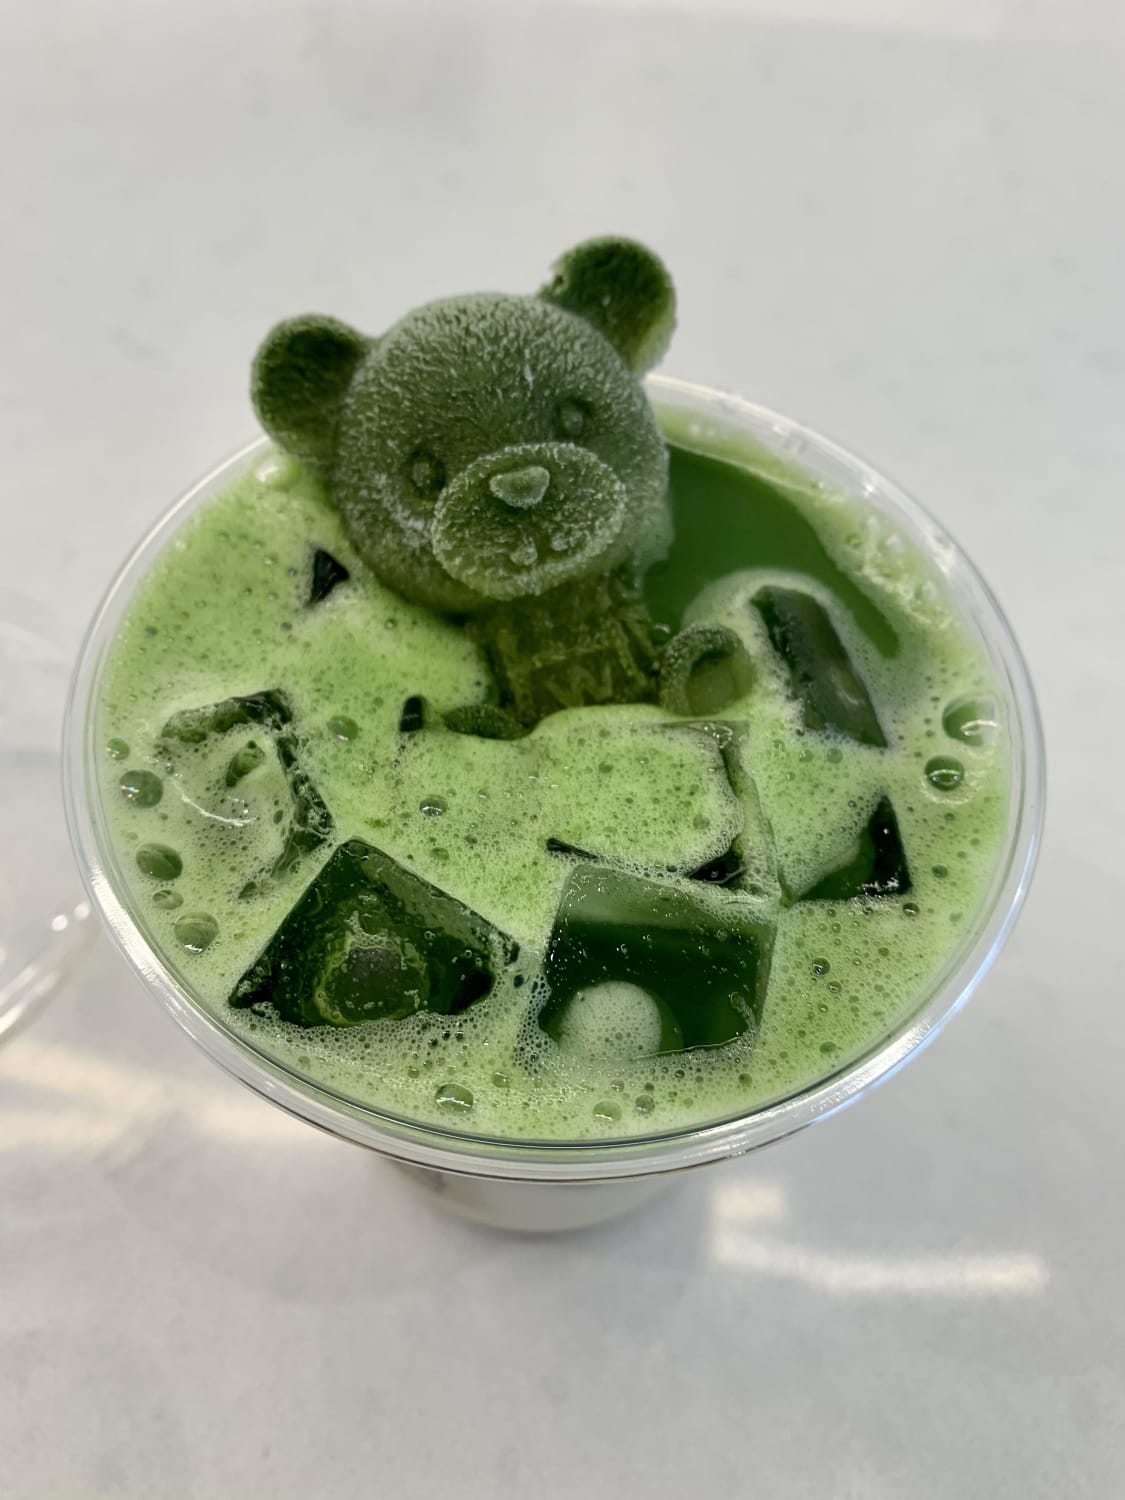 Lavender matcha latte with an extra matcha bear🐻🍵 (Support your local small businesses!)